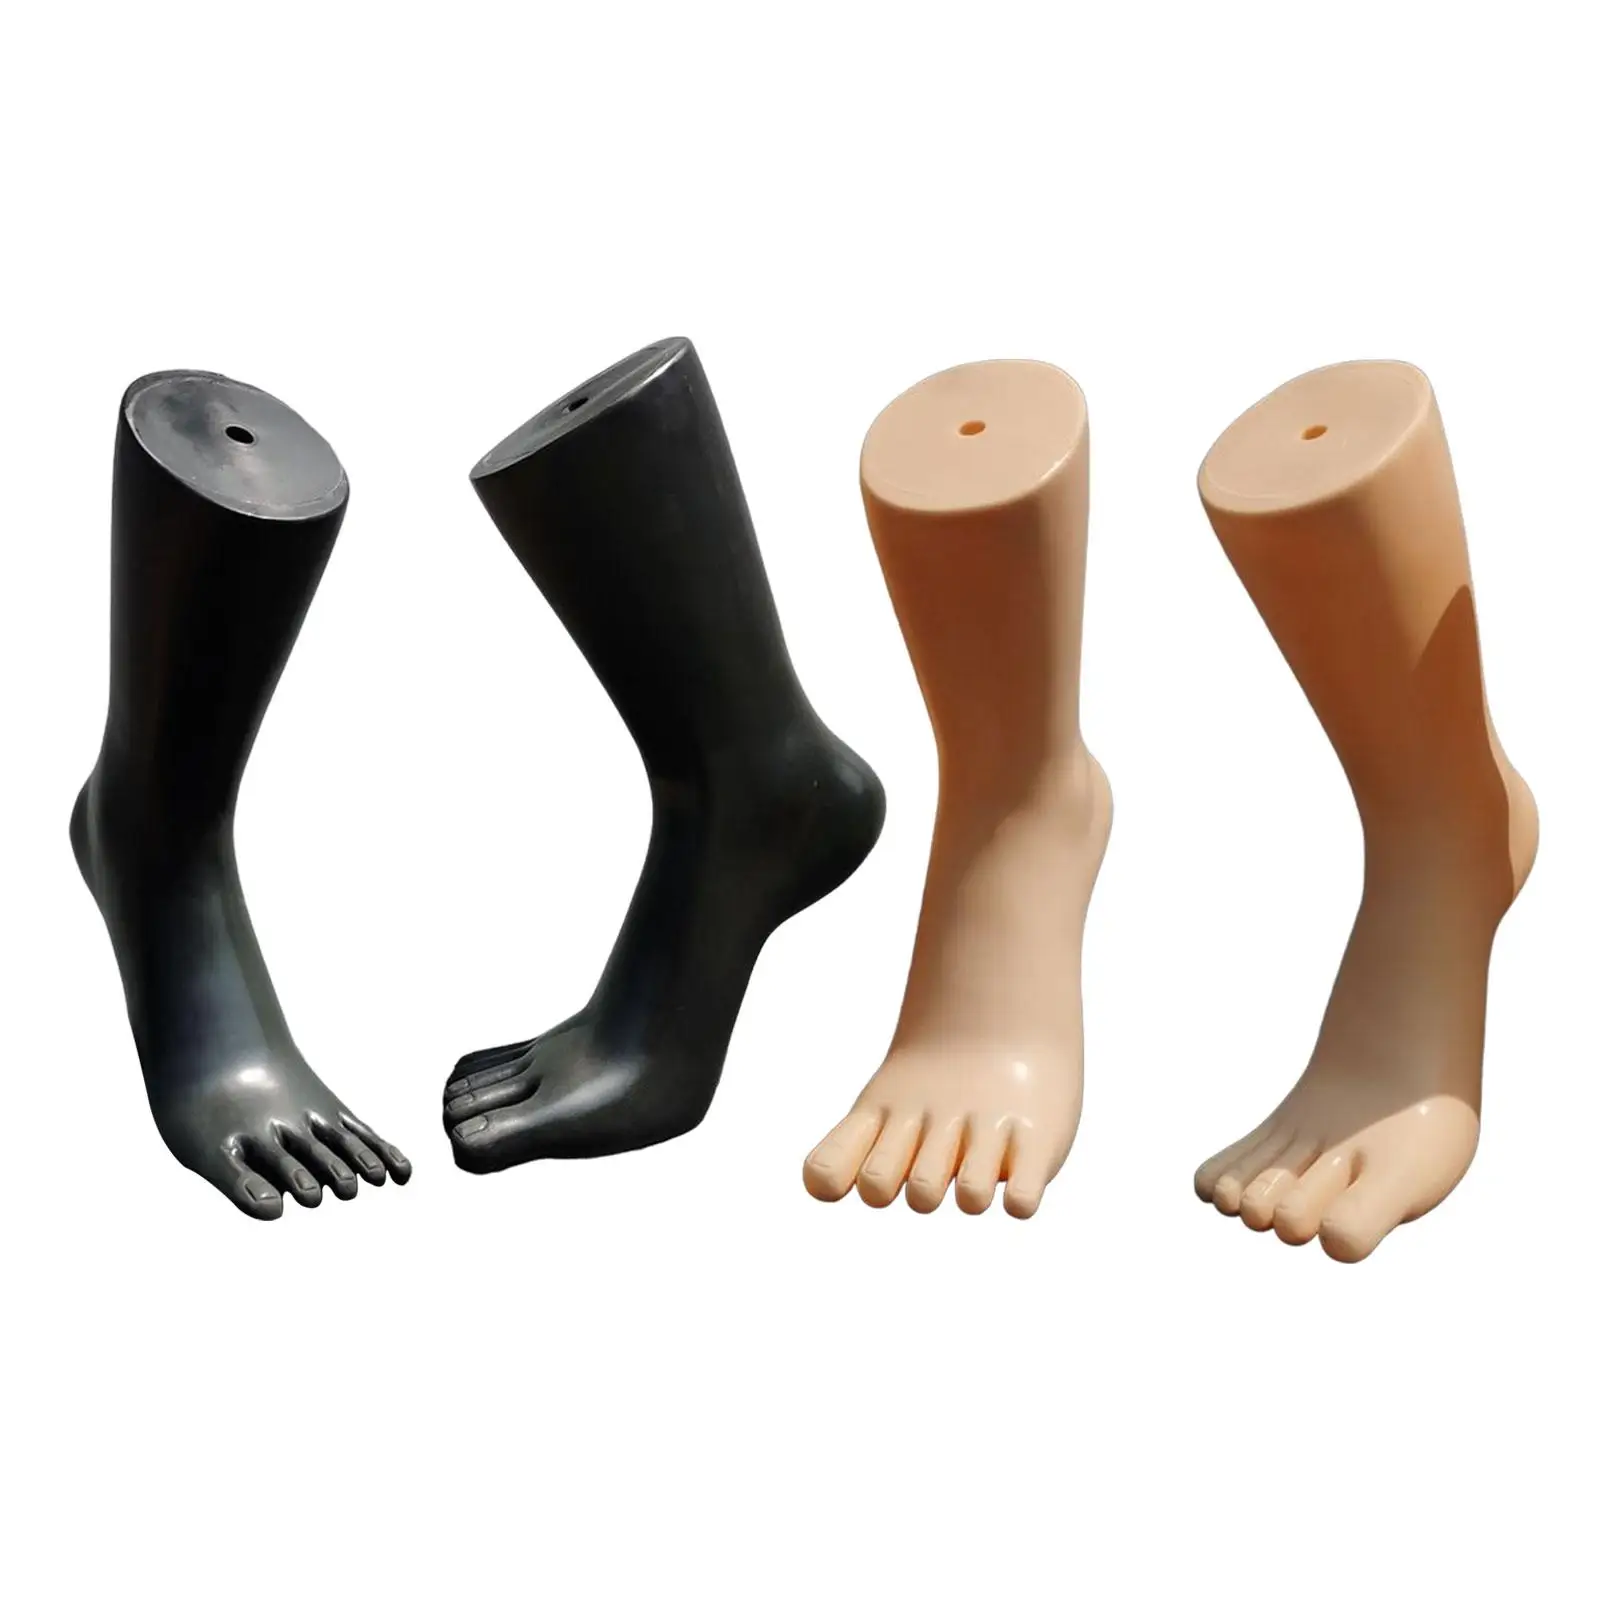 Mannequin Foot Shoes Display Props Shoes Displays Model Jewelry Display Stand Foot Model Display for Retail Shoes Ankle Bracelet